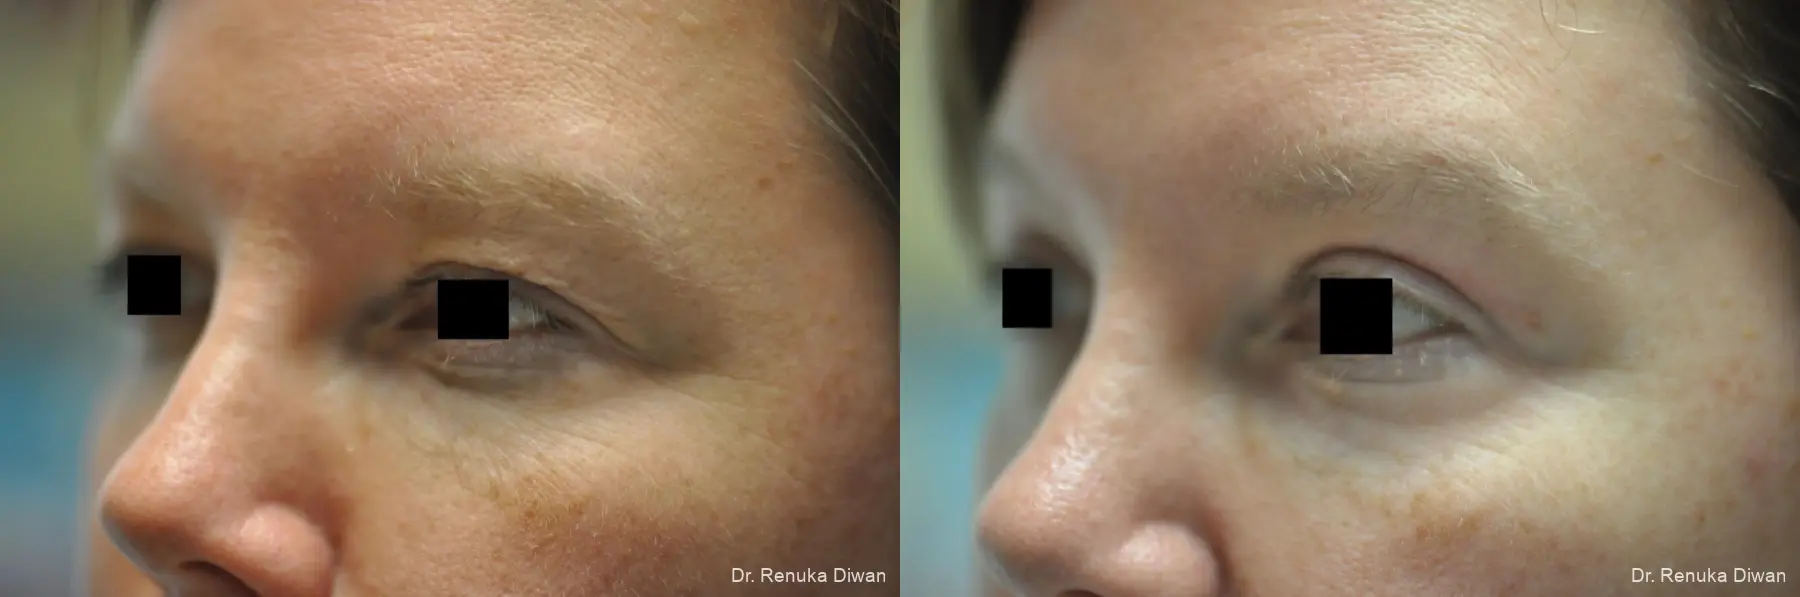 Blepharoplasty: Patient 2 - Before and After 3